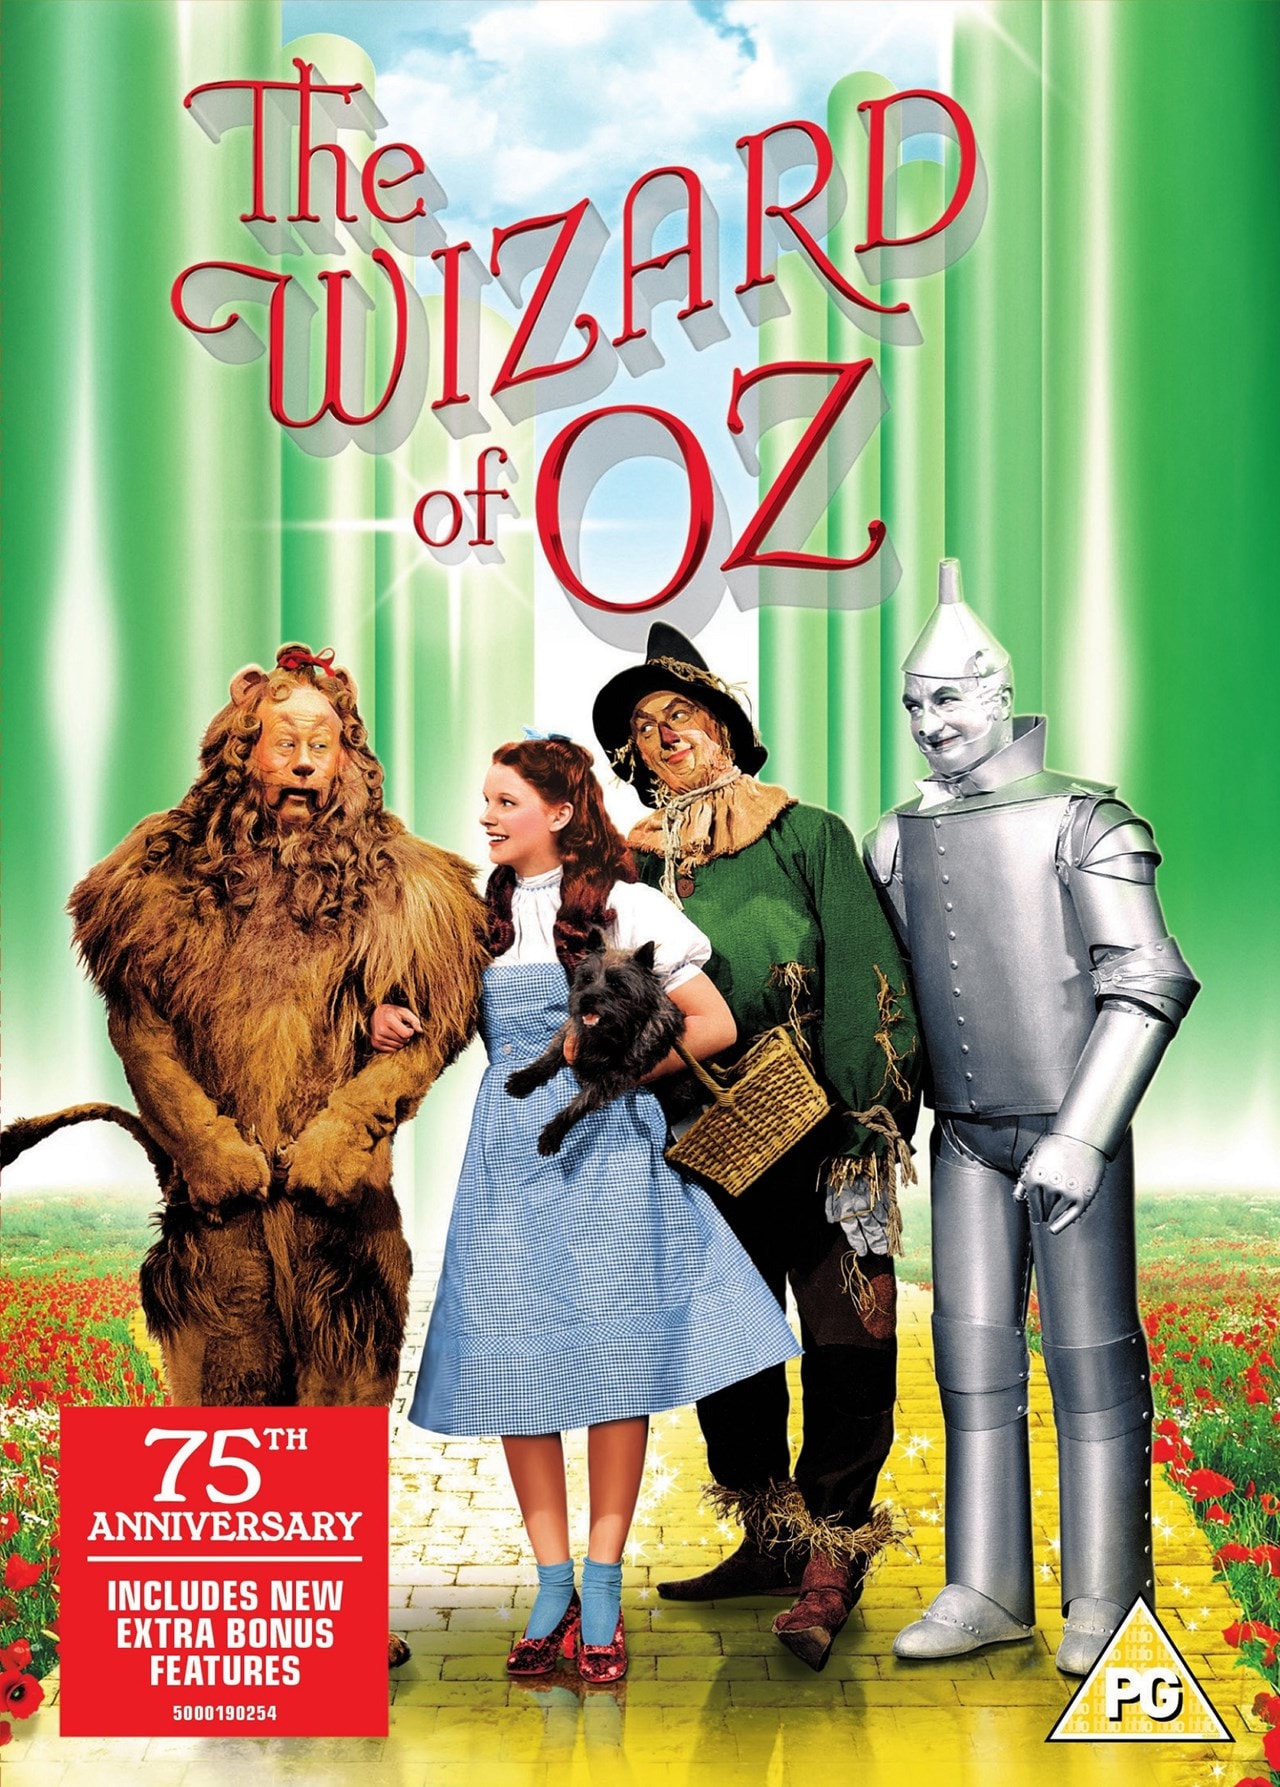 The Wizard of Oz | DVD | Free shipping over £20 | HMV Store